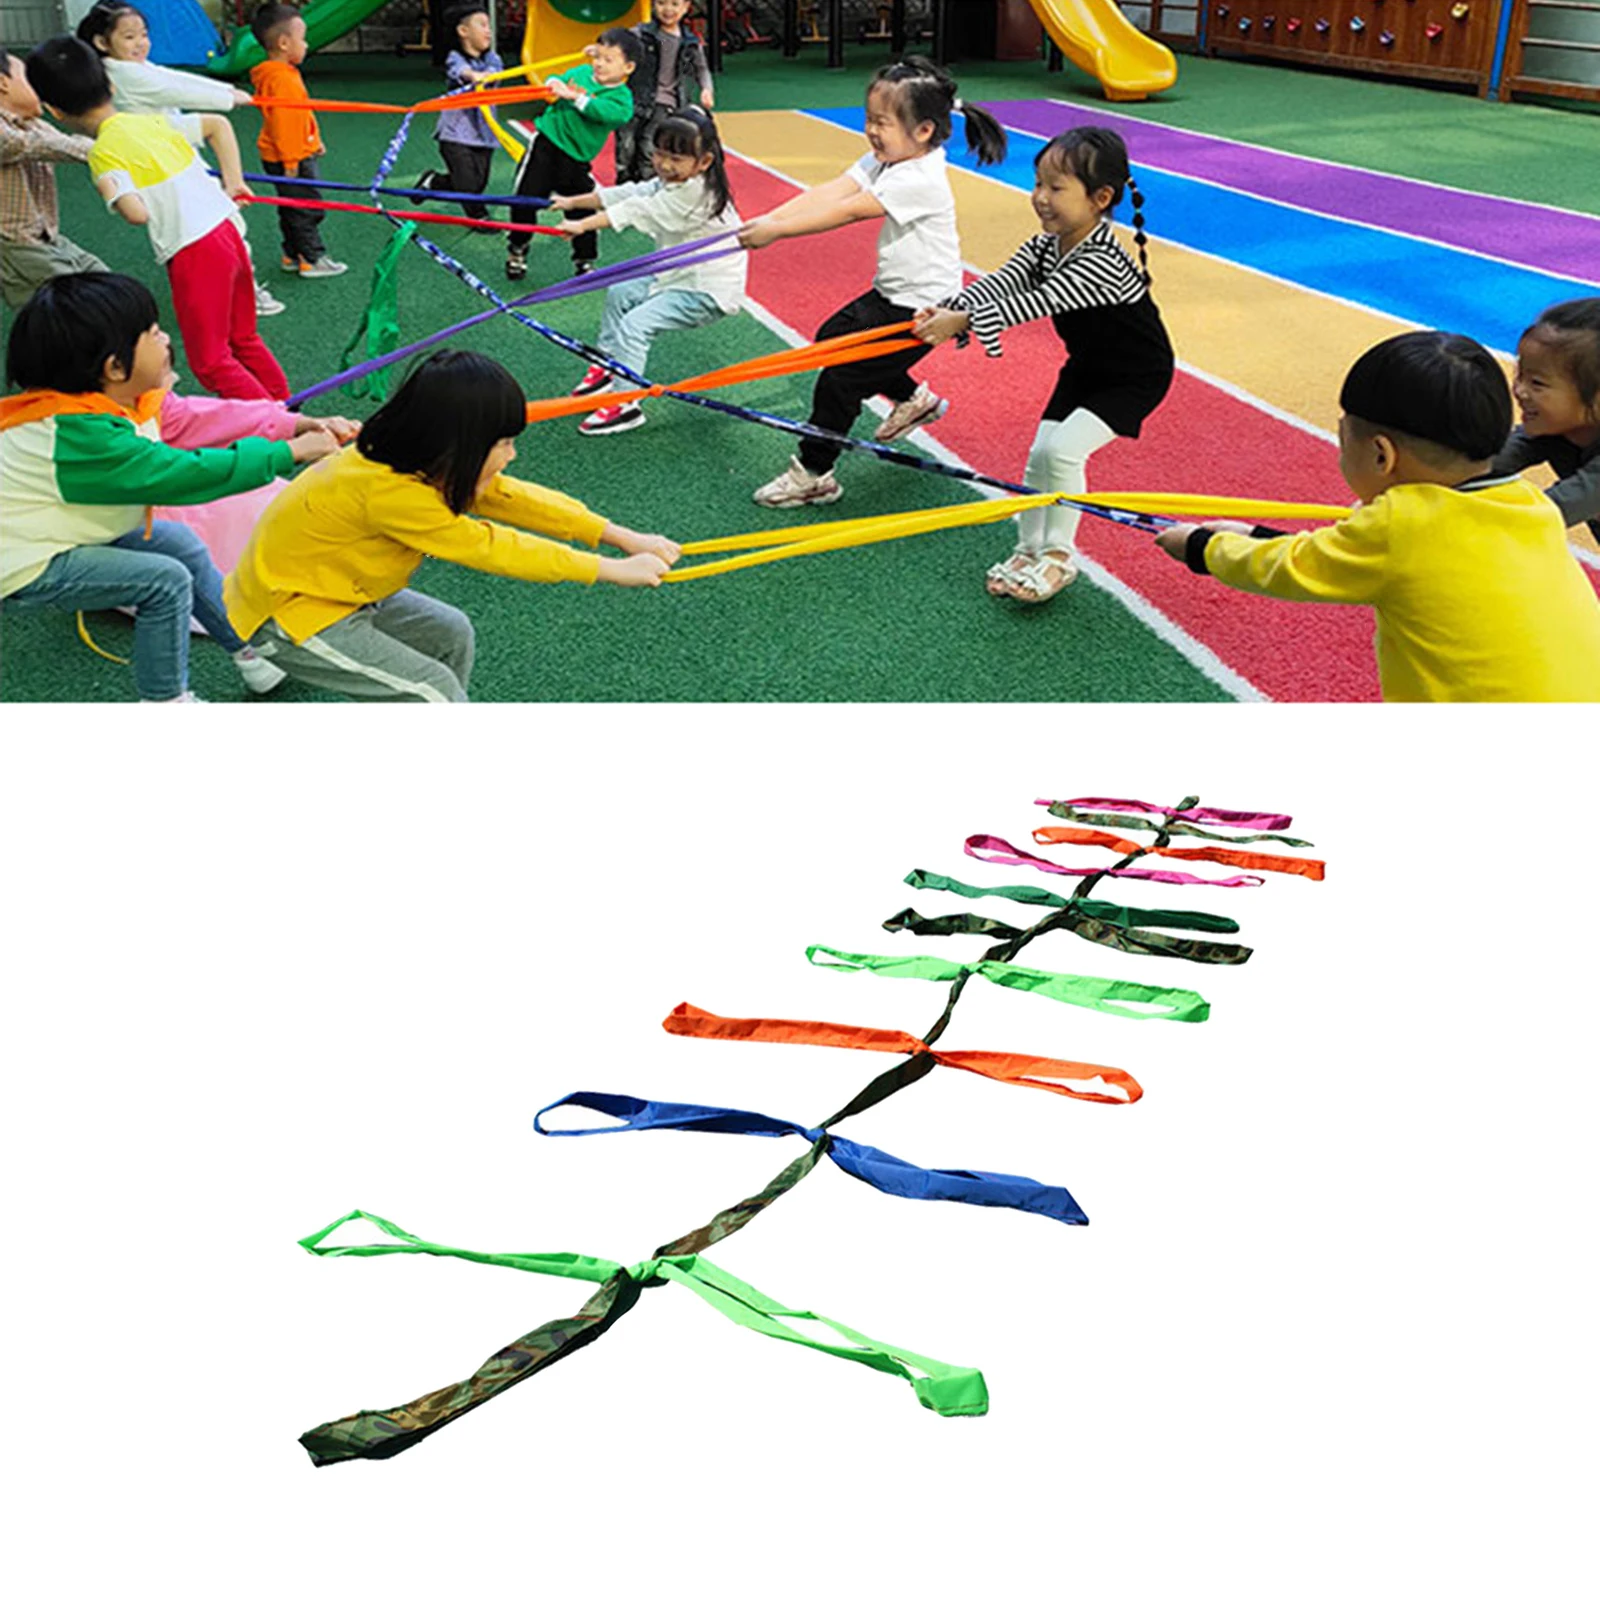 Tug of War Rope Yard Game Interesting And Enjoyable Game for Games Exercise